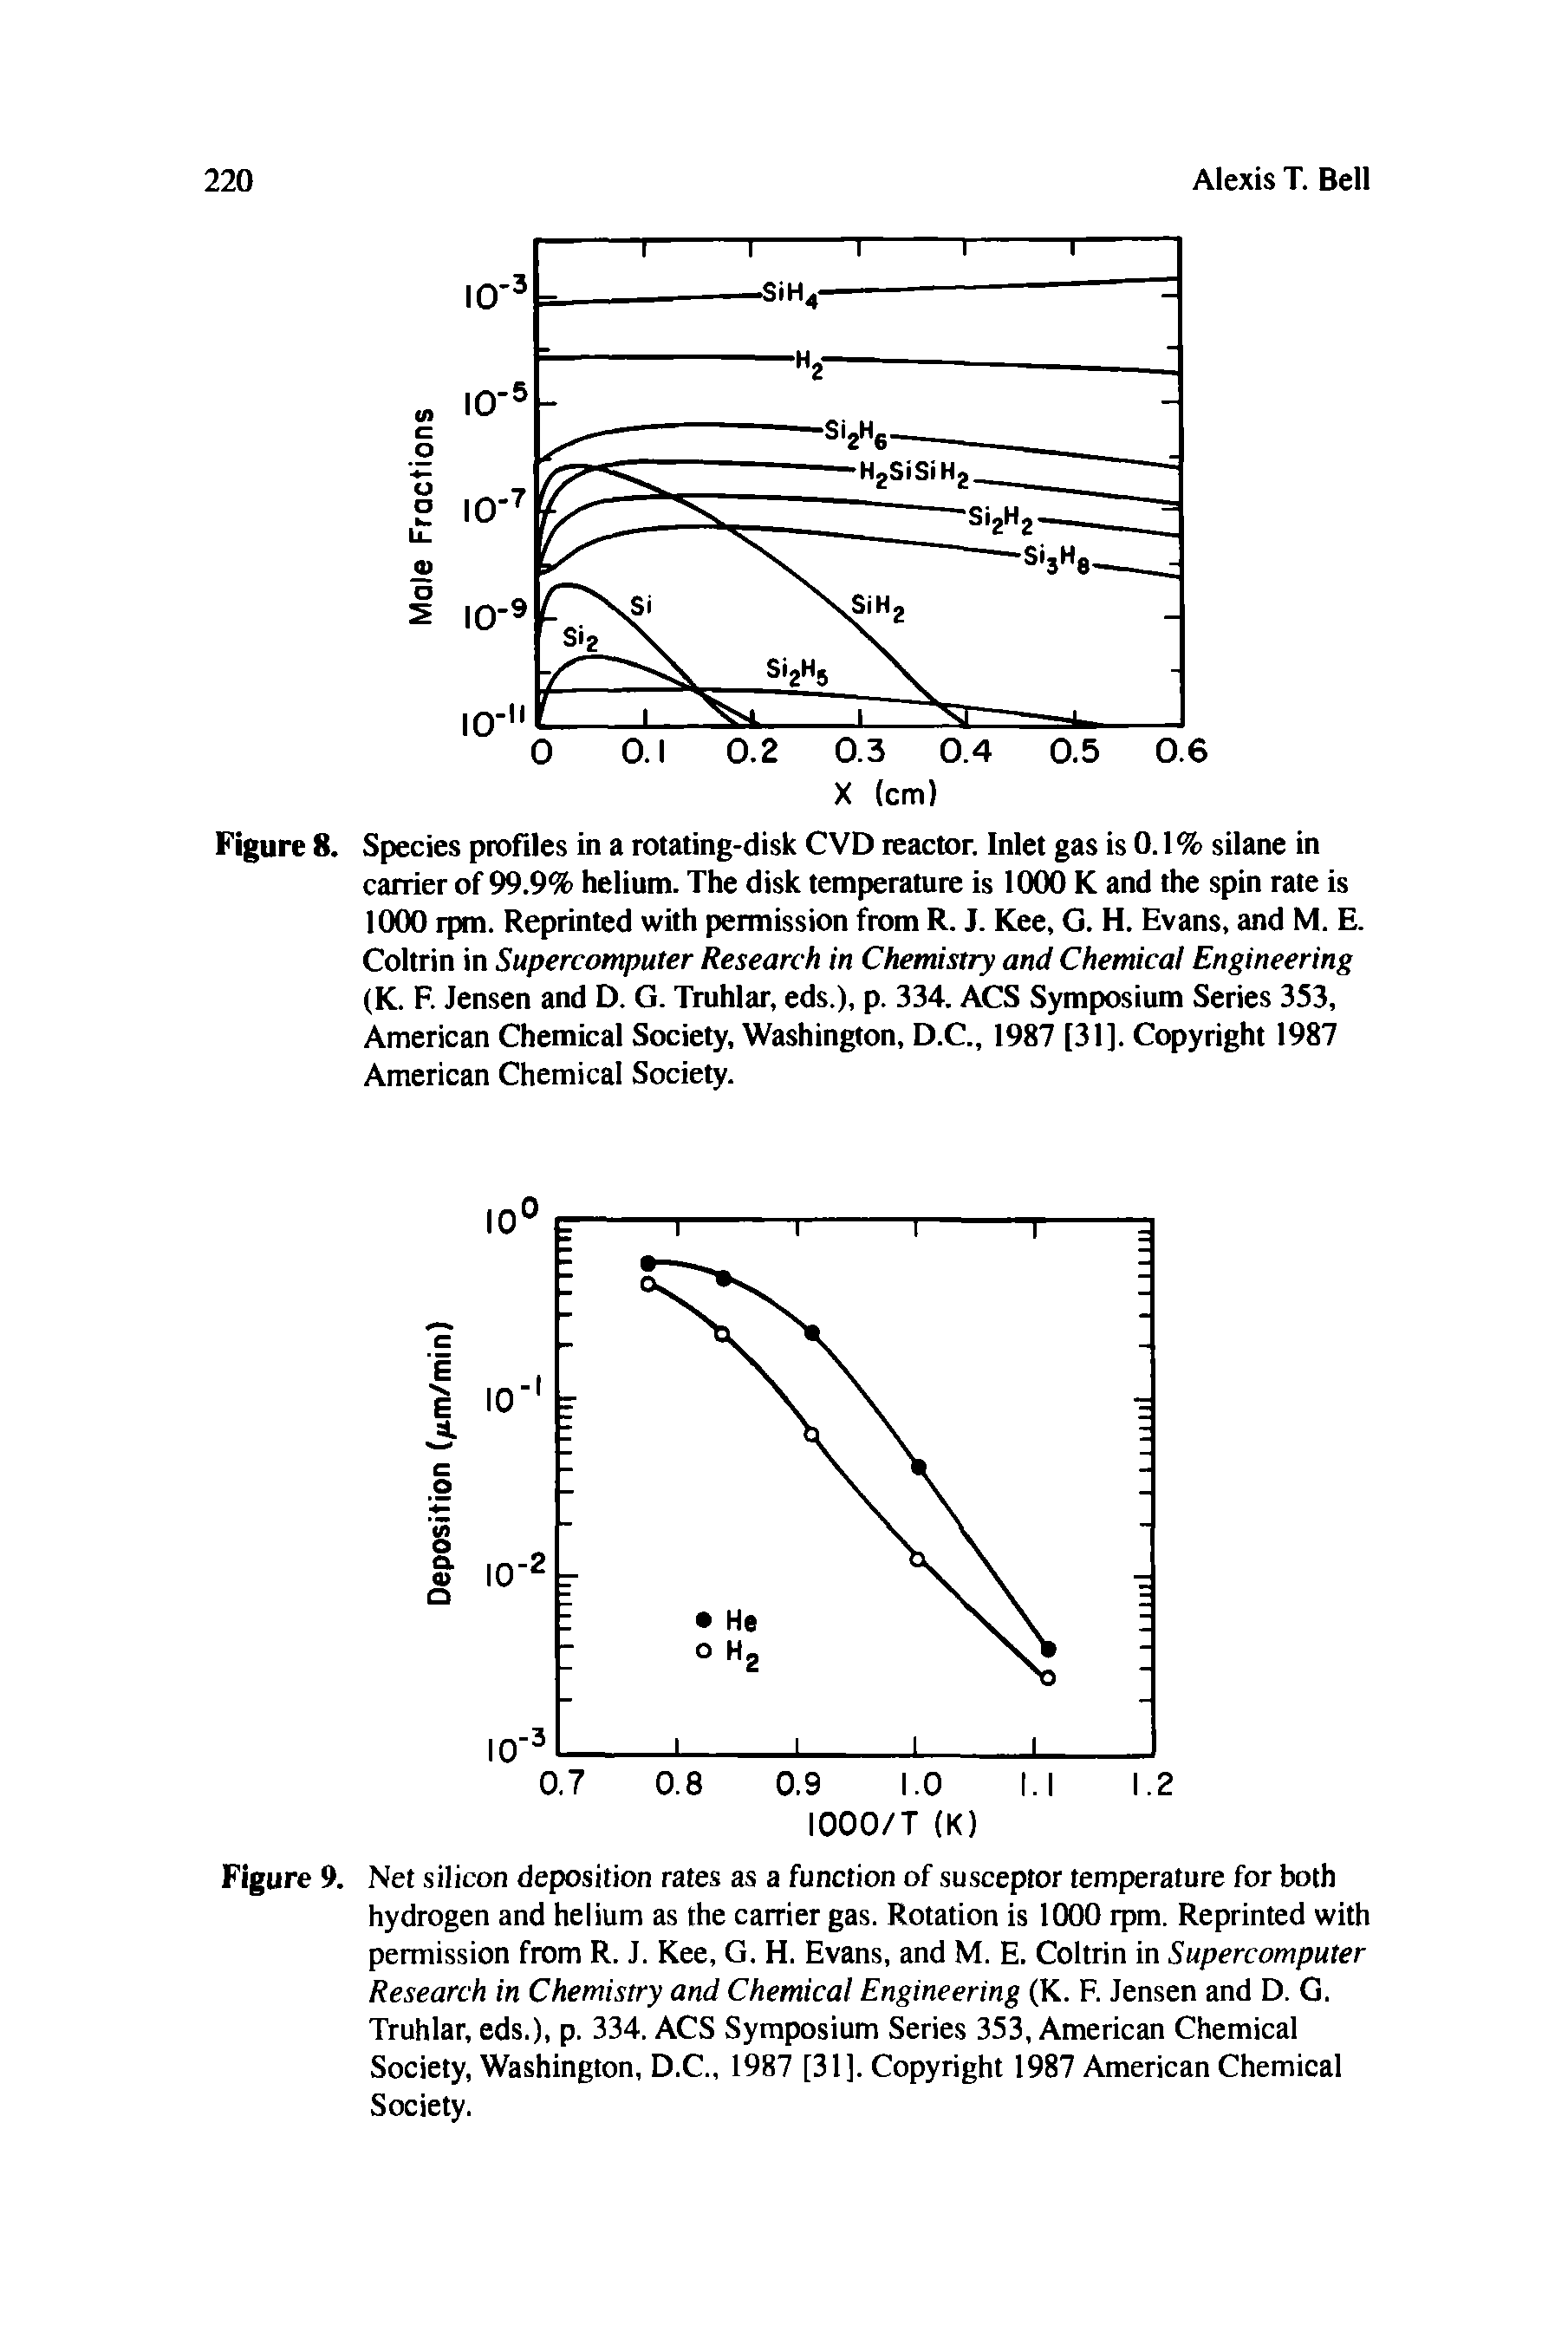 Figure 8. Species profiles in a rotating-disk CVD reactor. Inlet gas is 0.1% silane in carrier of 99.9% helium. The disk temperature is 1000 K and the spin rate is 1000 rpm. Reprinted with permission from R. J. Kee, G. H. Evans, and M. E. Coltrin in Supercomputer Research in Chemistry and Chemical Engineering (K. F. Jensen and D. G. Truhlar, eds.), p. 334. ACS Symposium Series 353, American Chemical Society, Washington, D.C., 1987 [31]. Copyright 1987 American Chemical Society.